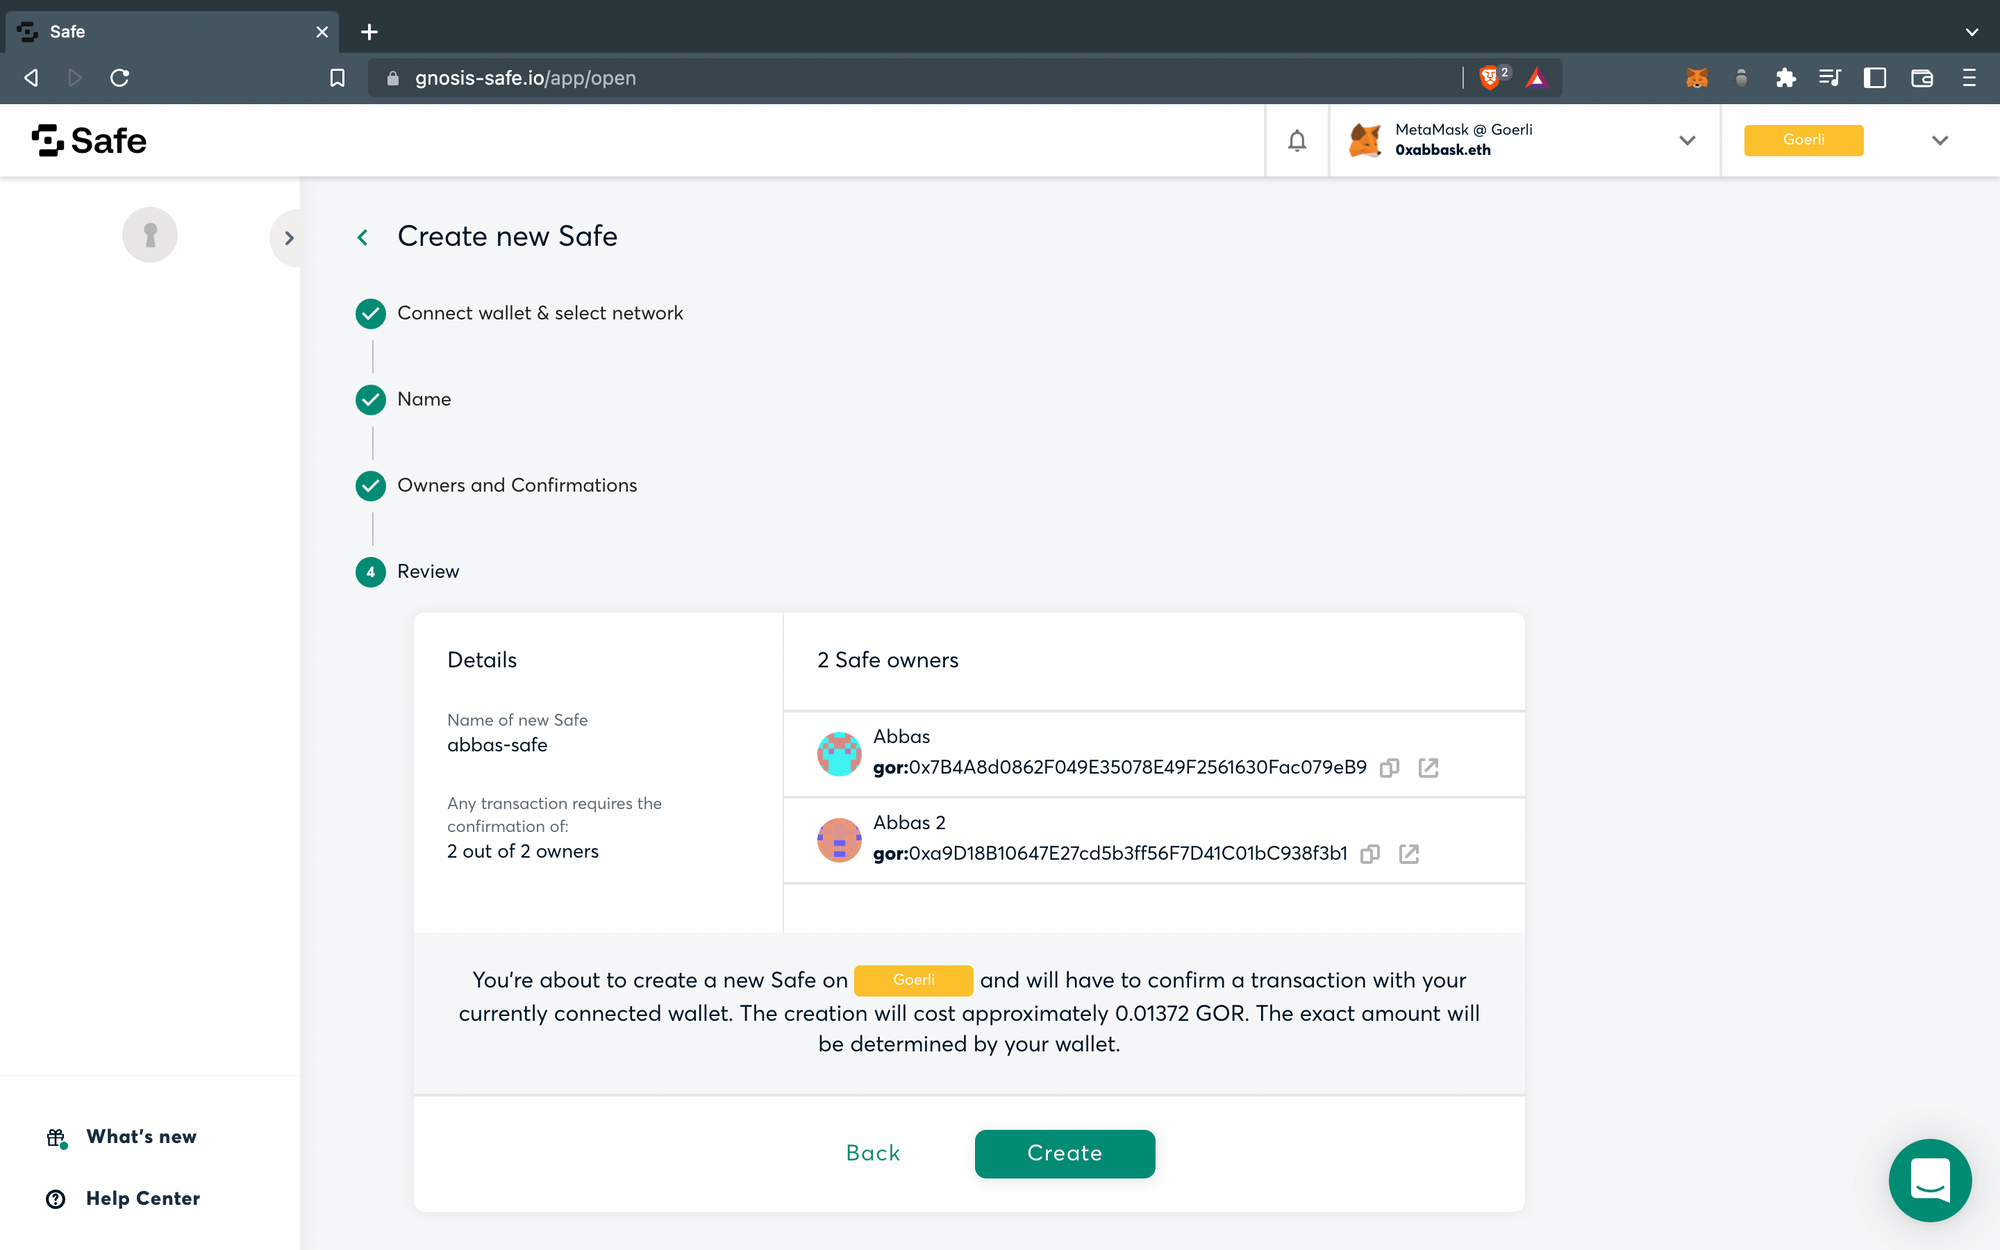 Click on Create and approve the transaction to deploy the smart contract and create your safe